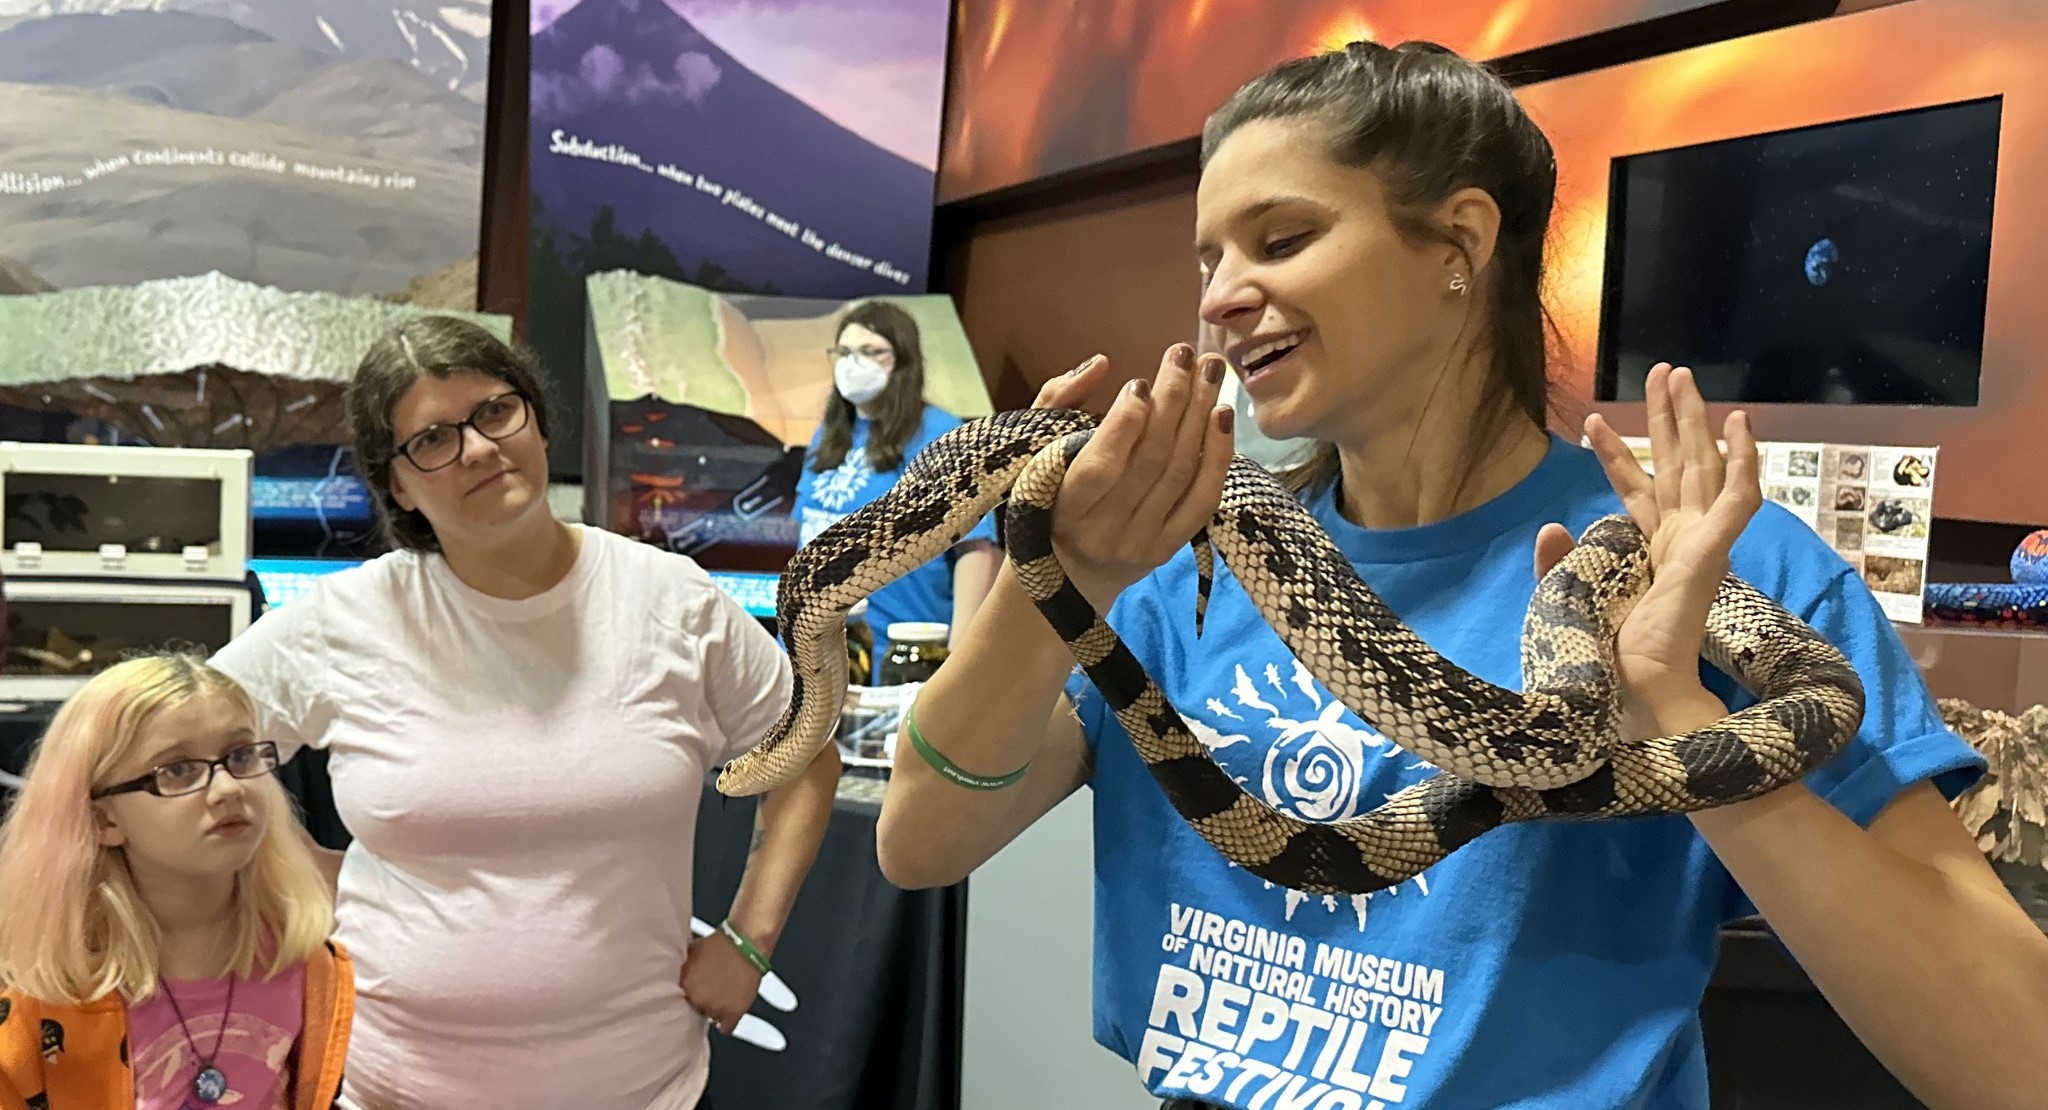 Expert herpetologists, like VMNH Assistant Curator of Herpetology Dr. Arianna Kuhn will be on-hand to share their expertise!